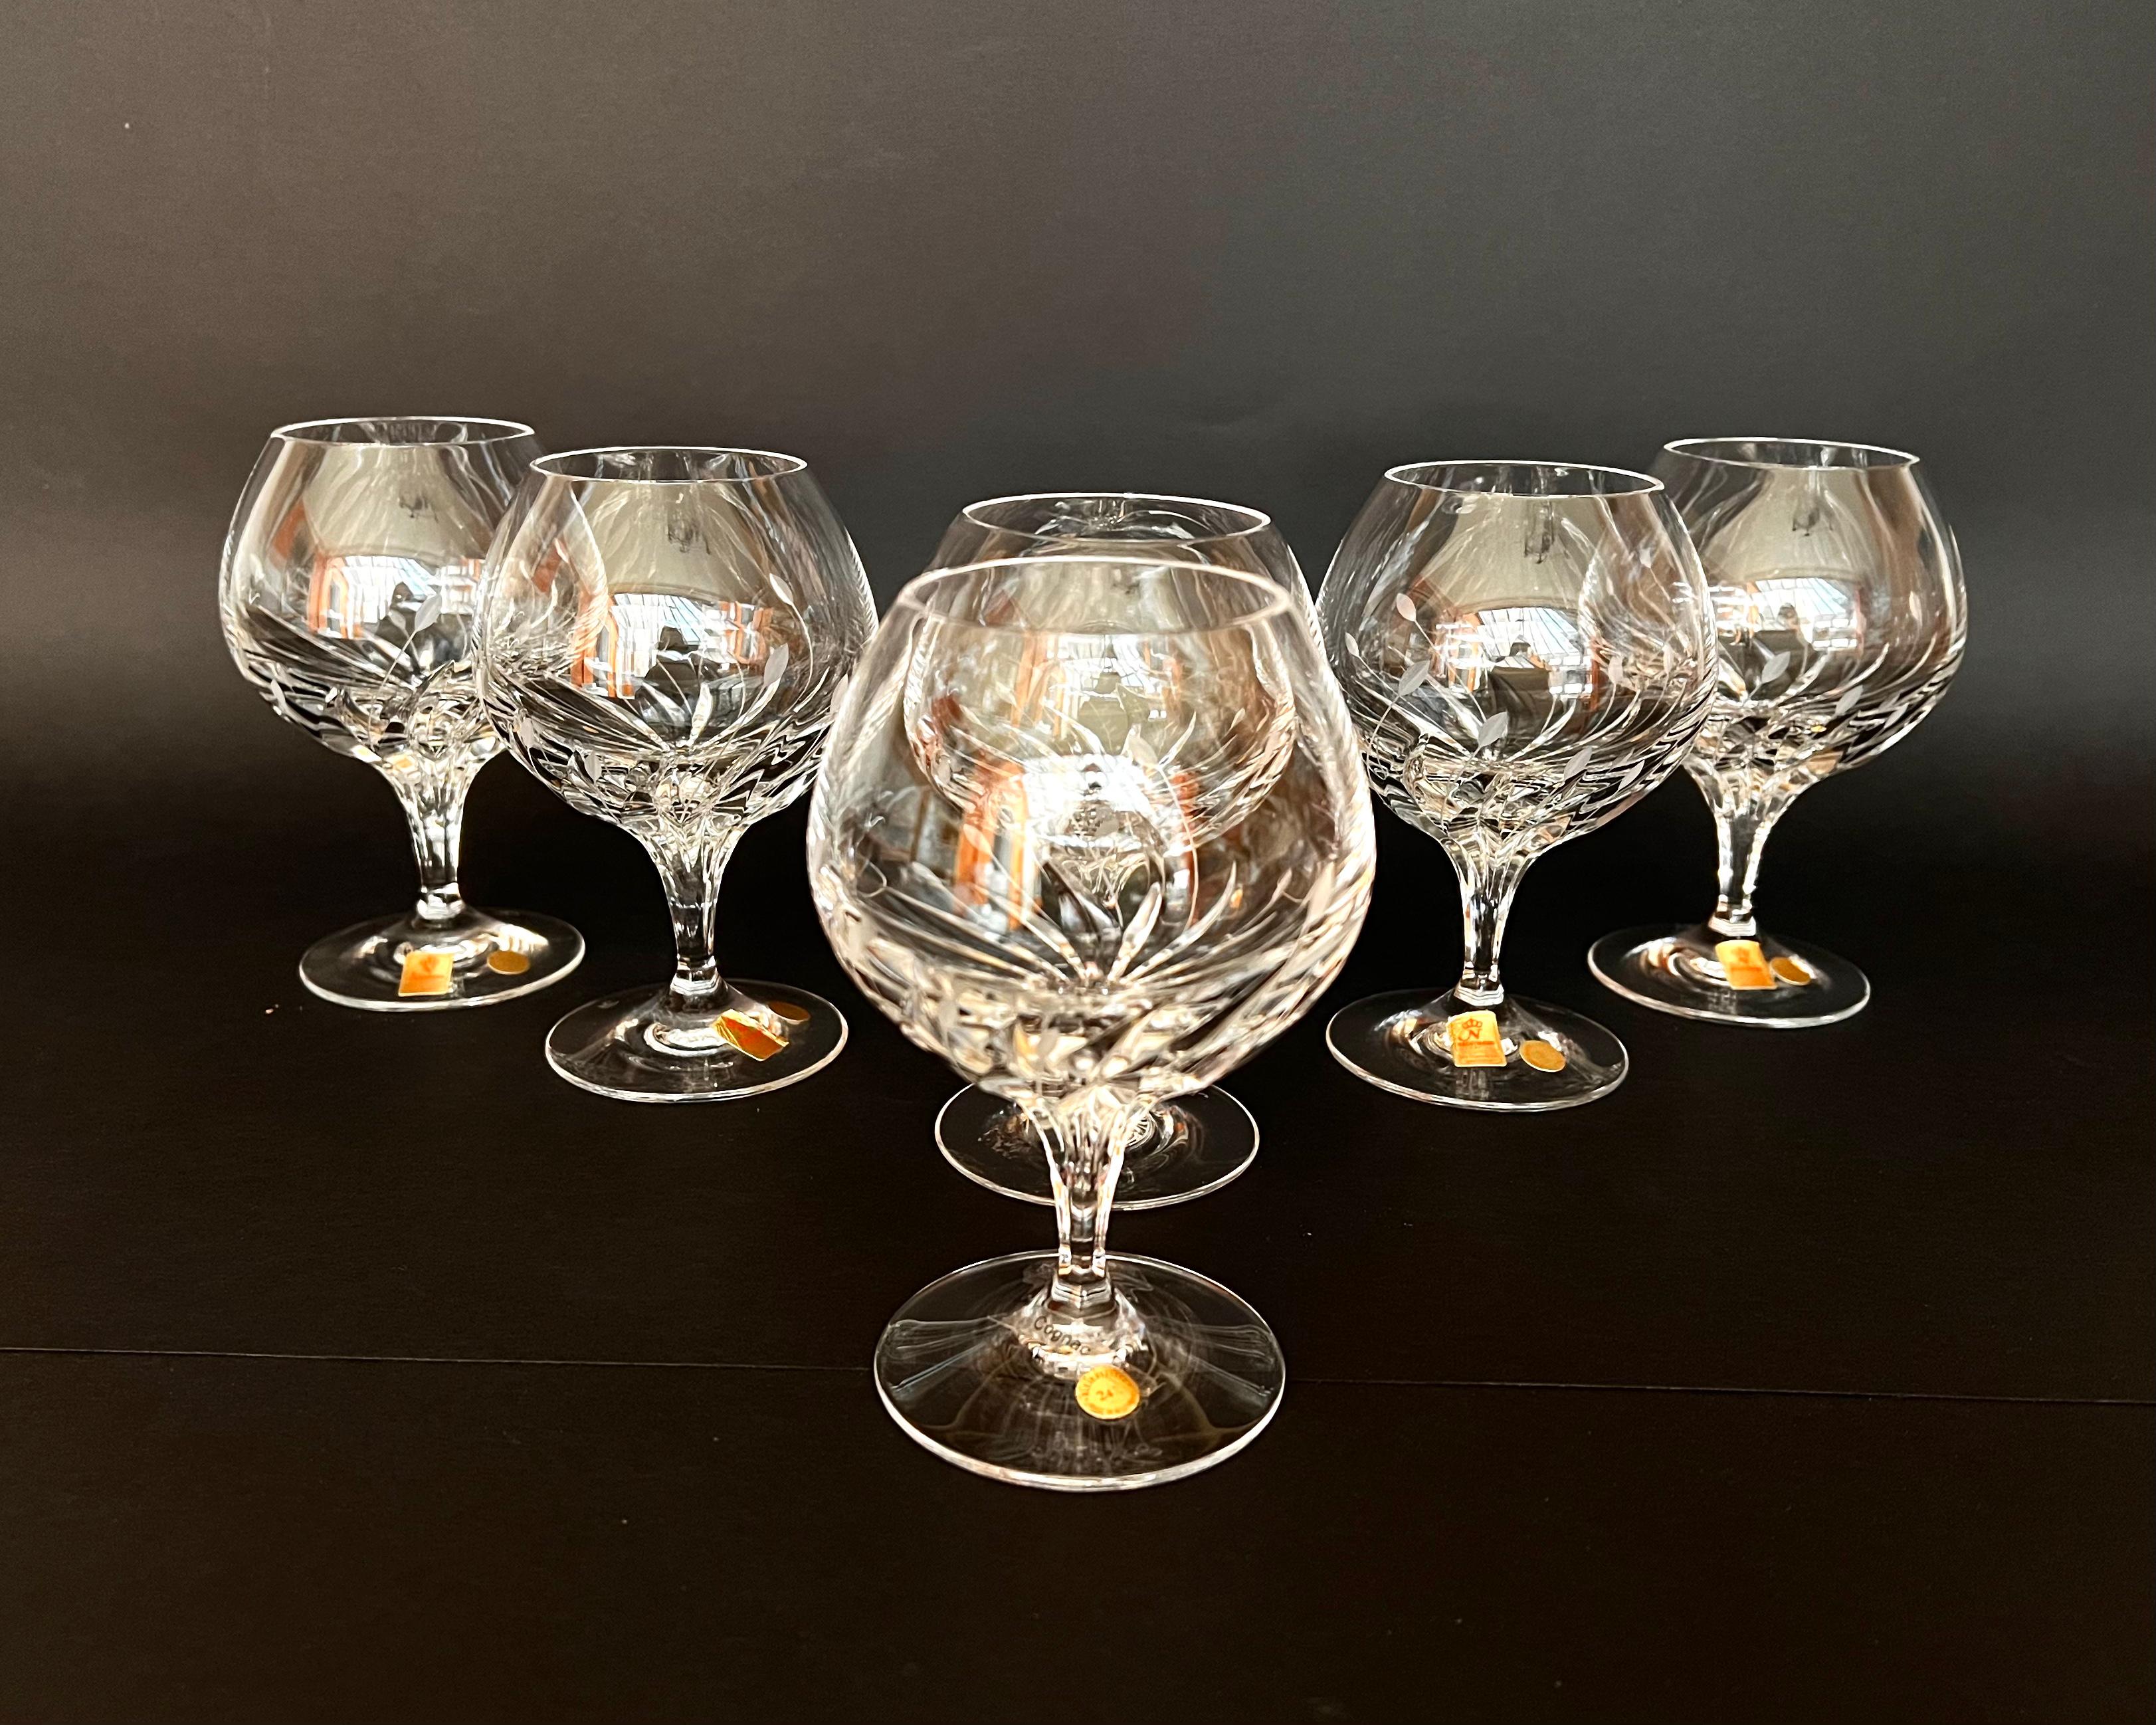 Vintage Crystal Cognac glasses set 6 produced in Germany by Nachtmann, “Fleurie